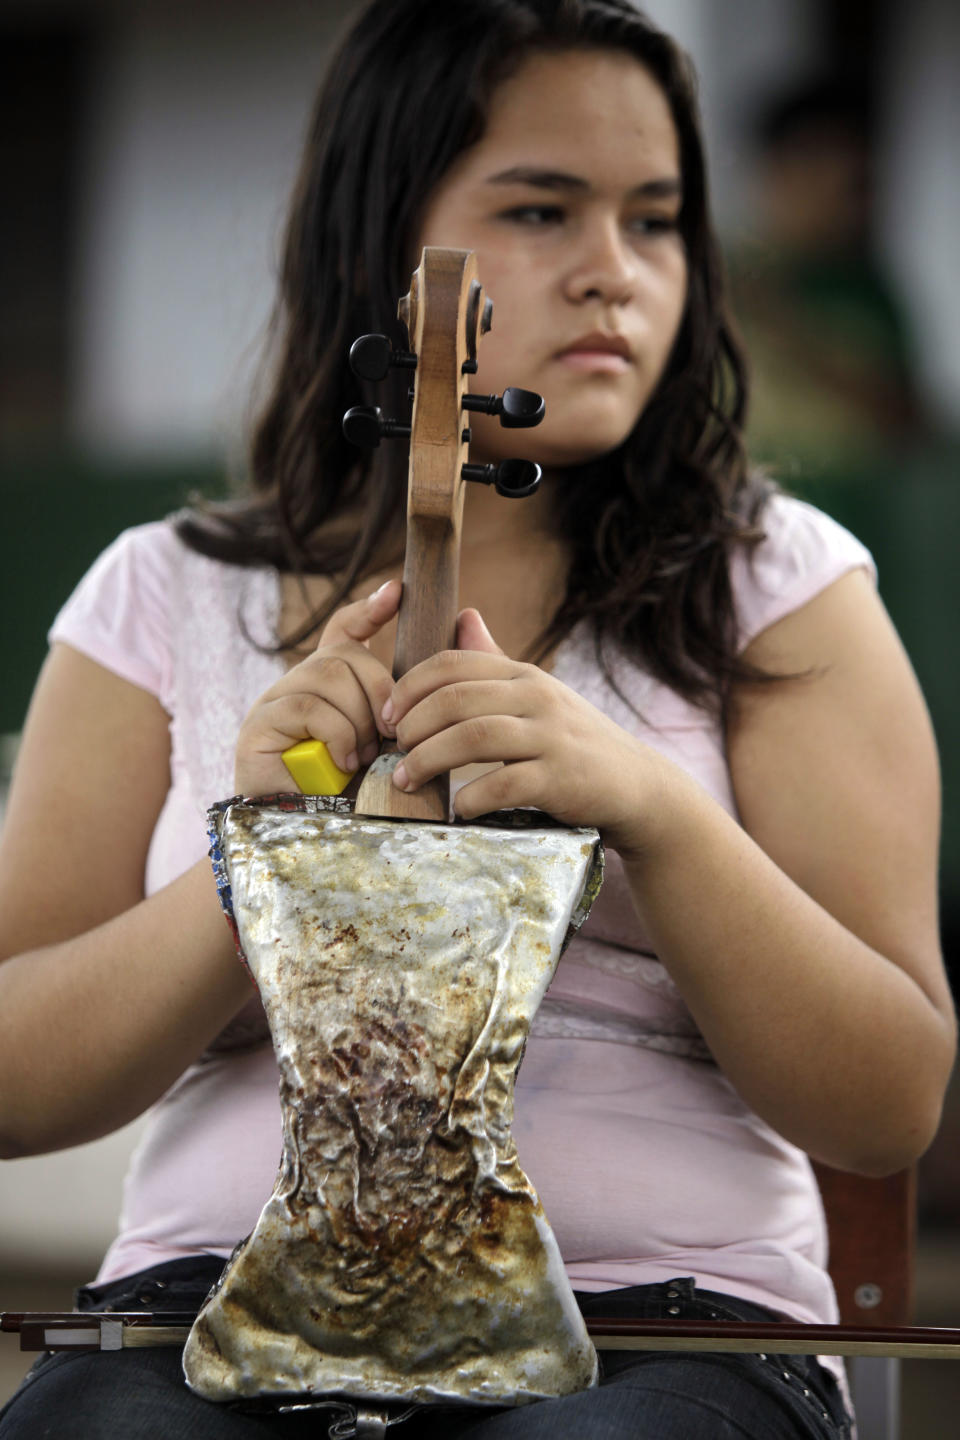 In this Dec. 11, 2012 photo, musician Maria Rios, 16, holds her violin made of recycled materials before practicing with “The Orchestra of Instruments Recycled From Cateura” in Cateura, a vast landfill outside Paraguay's capital of Asuncion, Paraguay. “My mother signed me up in teacher Chavez's school three years ago. I was really bothered that she hadn't asked me first, but today I'm thankful because she put my name in as someone who wanted to learn violin,” Maria said. (AP Photo/Jorge Saenz)